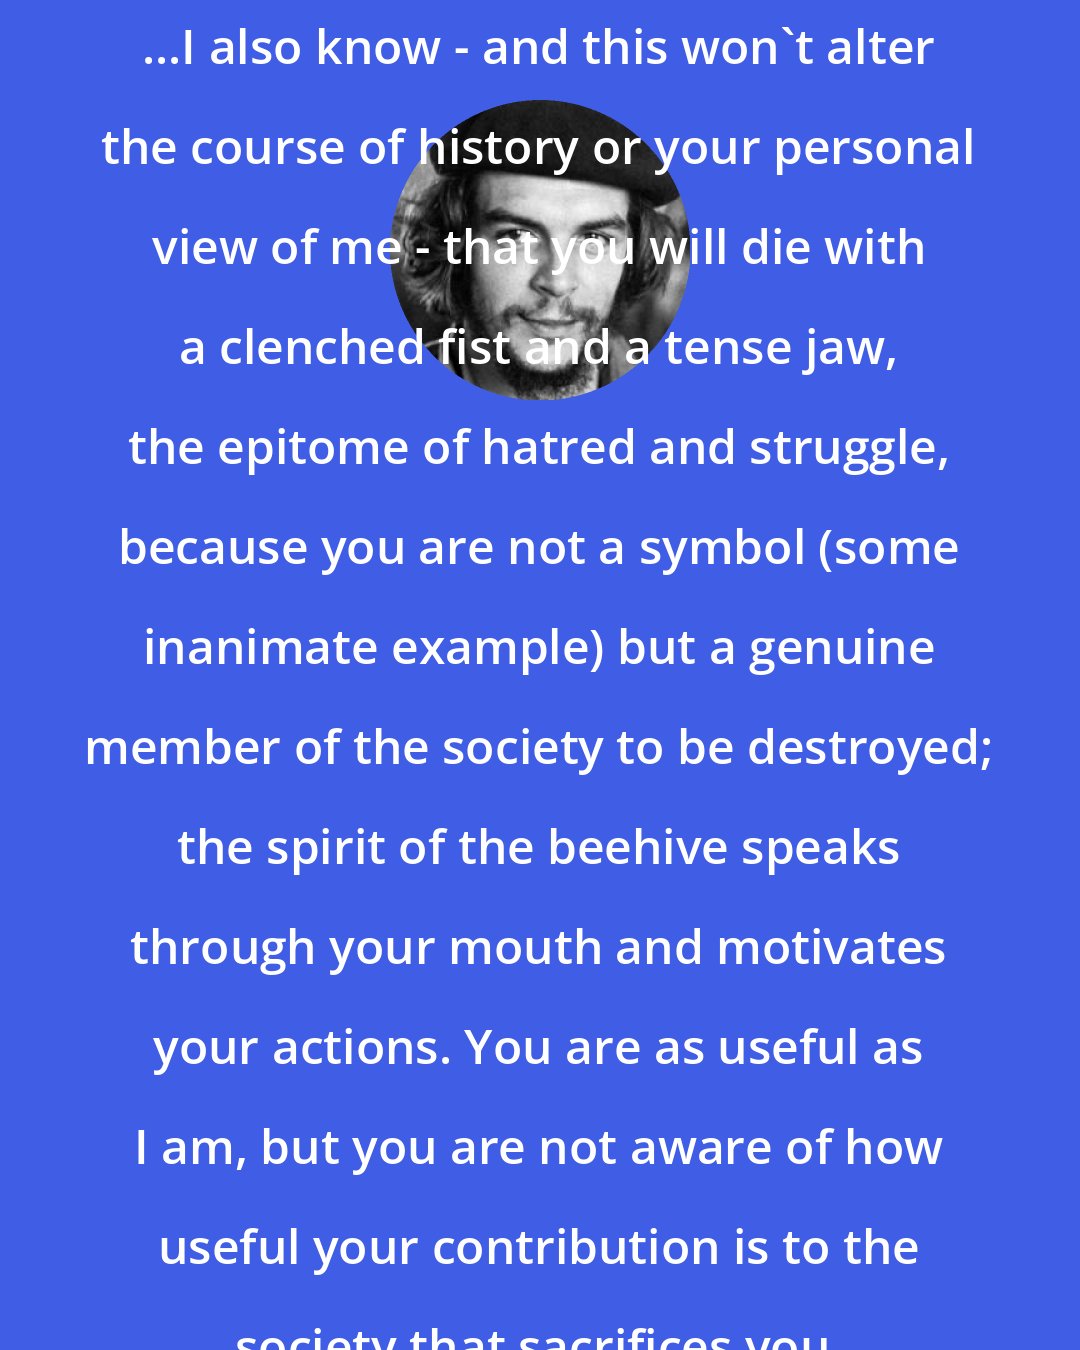 Che Guevara: ...I also know - and this won't alter the course of history or your personal view of me - that you will die with a clenched fist and a tense jaw, the epitome of hatred and struggle, because you are not a symbol (some inanimate example) but a genuine member of the society to be destroyed; the spirit of the beehive speaks through your mouth and motivates your actions. You are as useful as I am, but you are not aware of how useful your contribution is to the society that sacrifices you.